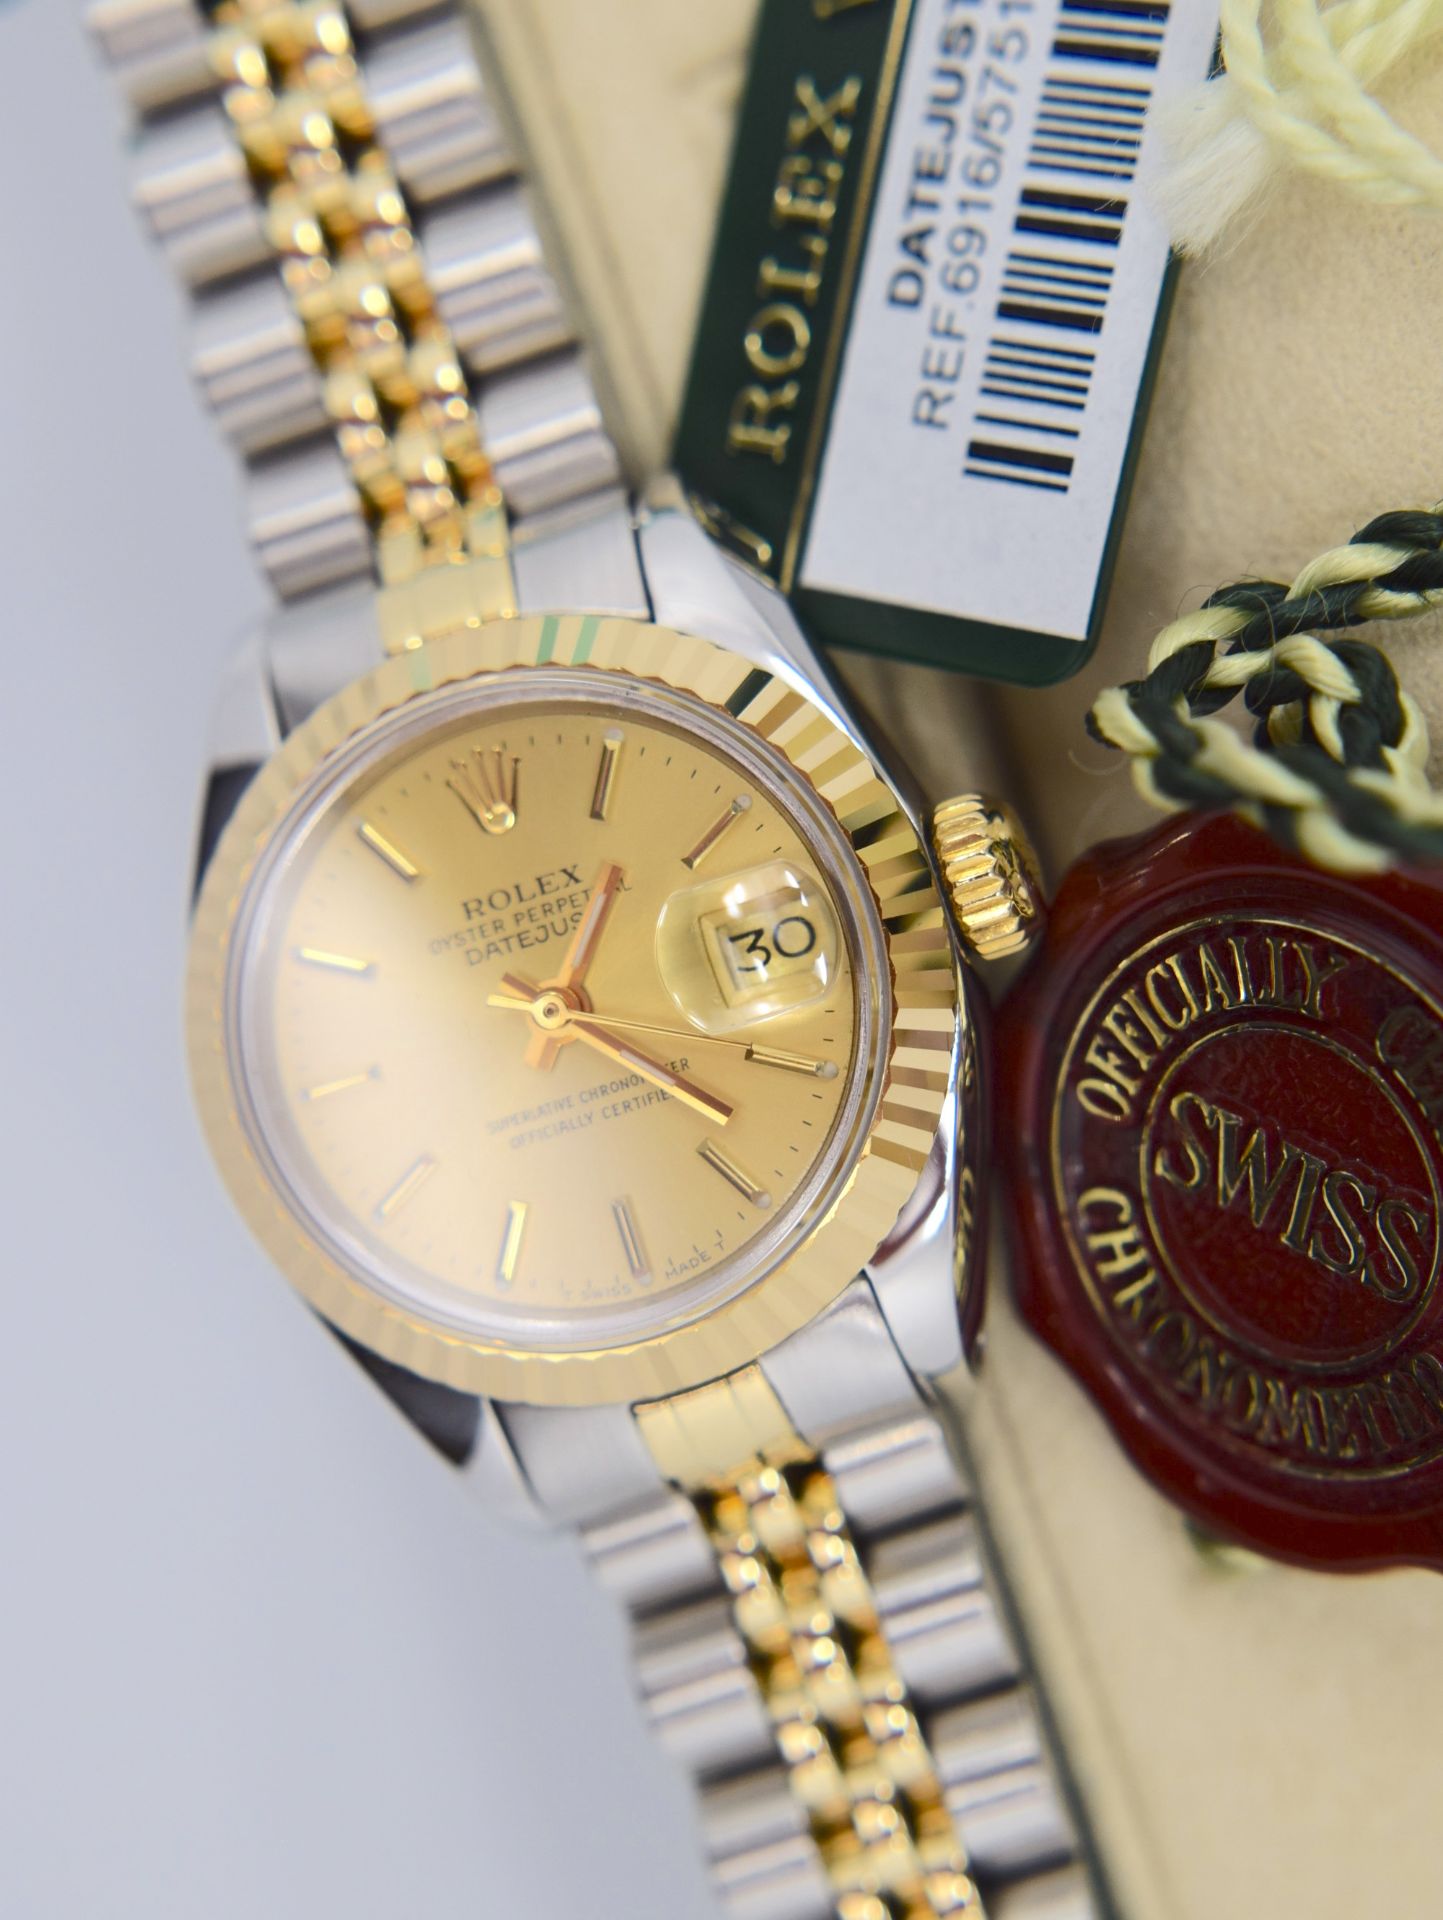 Stunning Rolex Datejust - Bimetal / Champagne Dial (Box, tags etc.) - Image 4 of 7